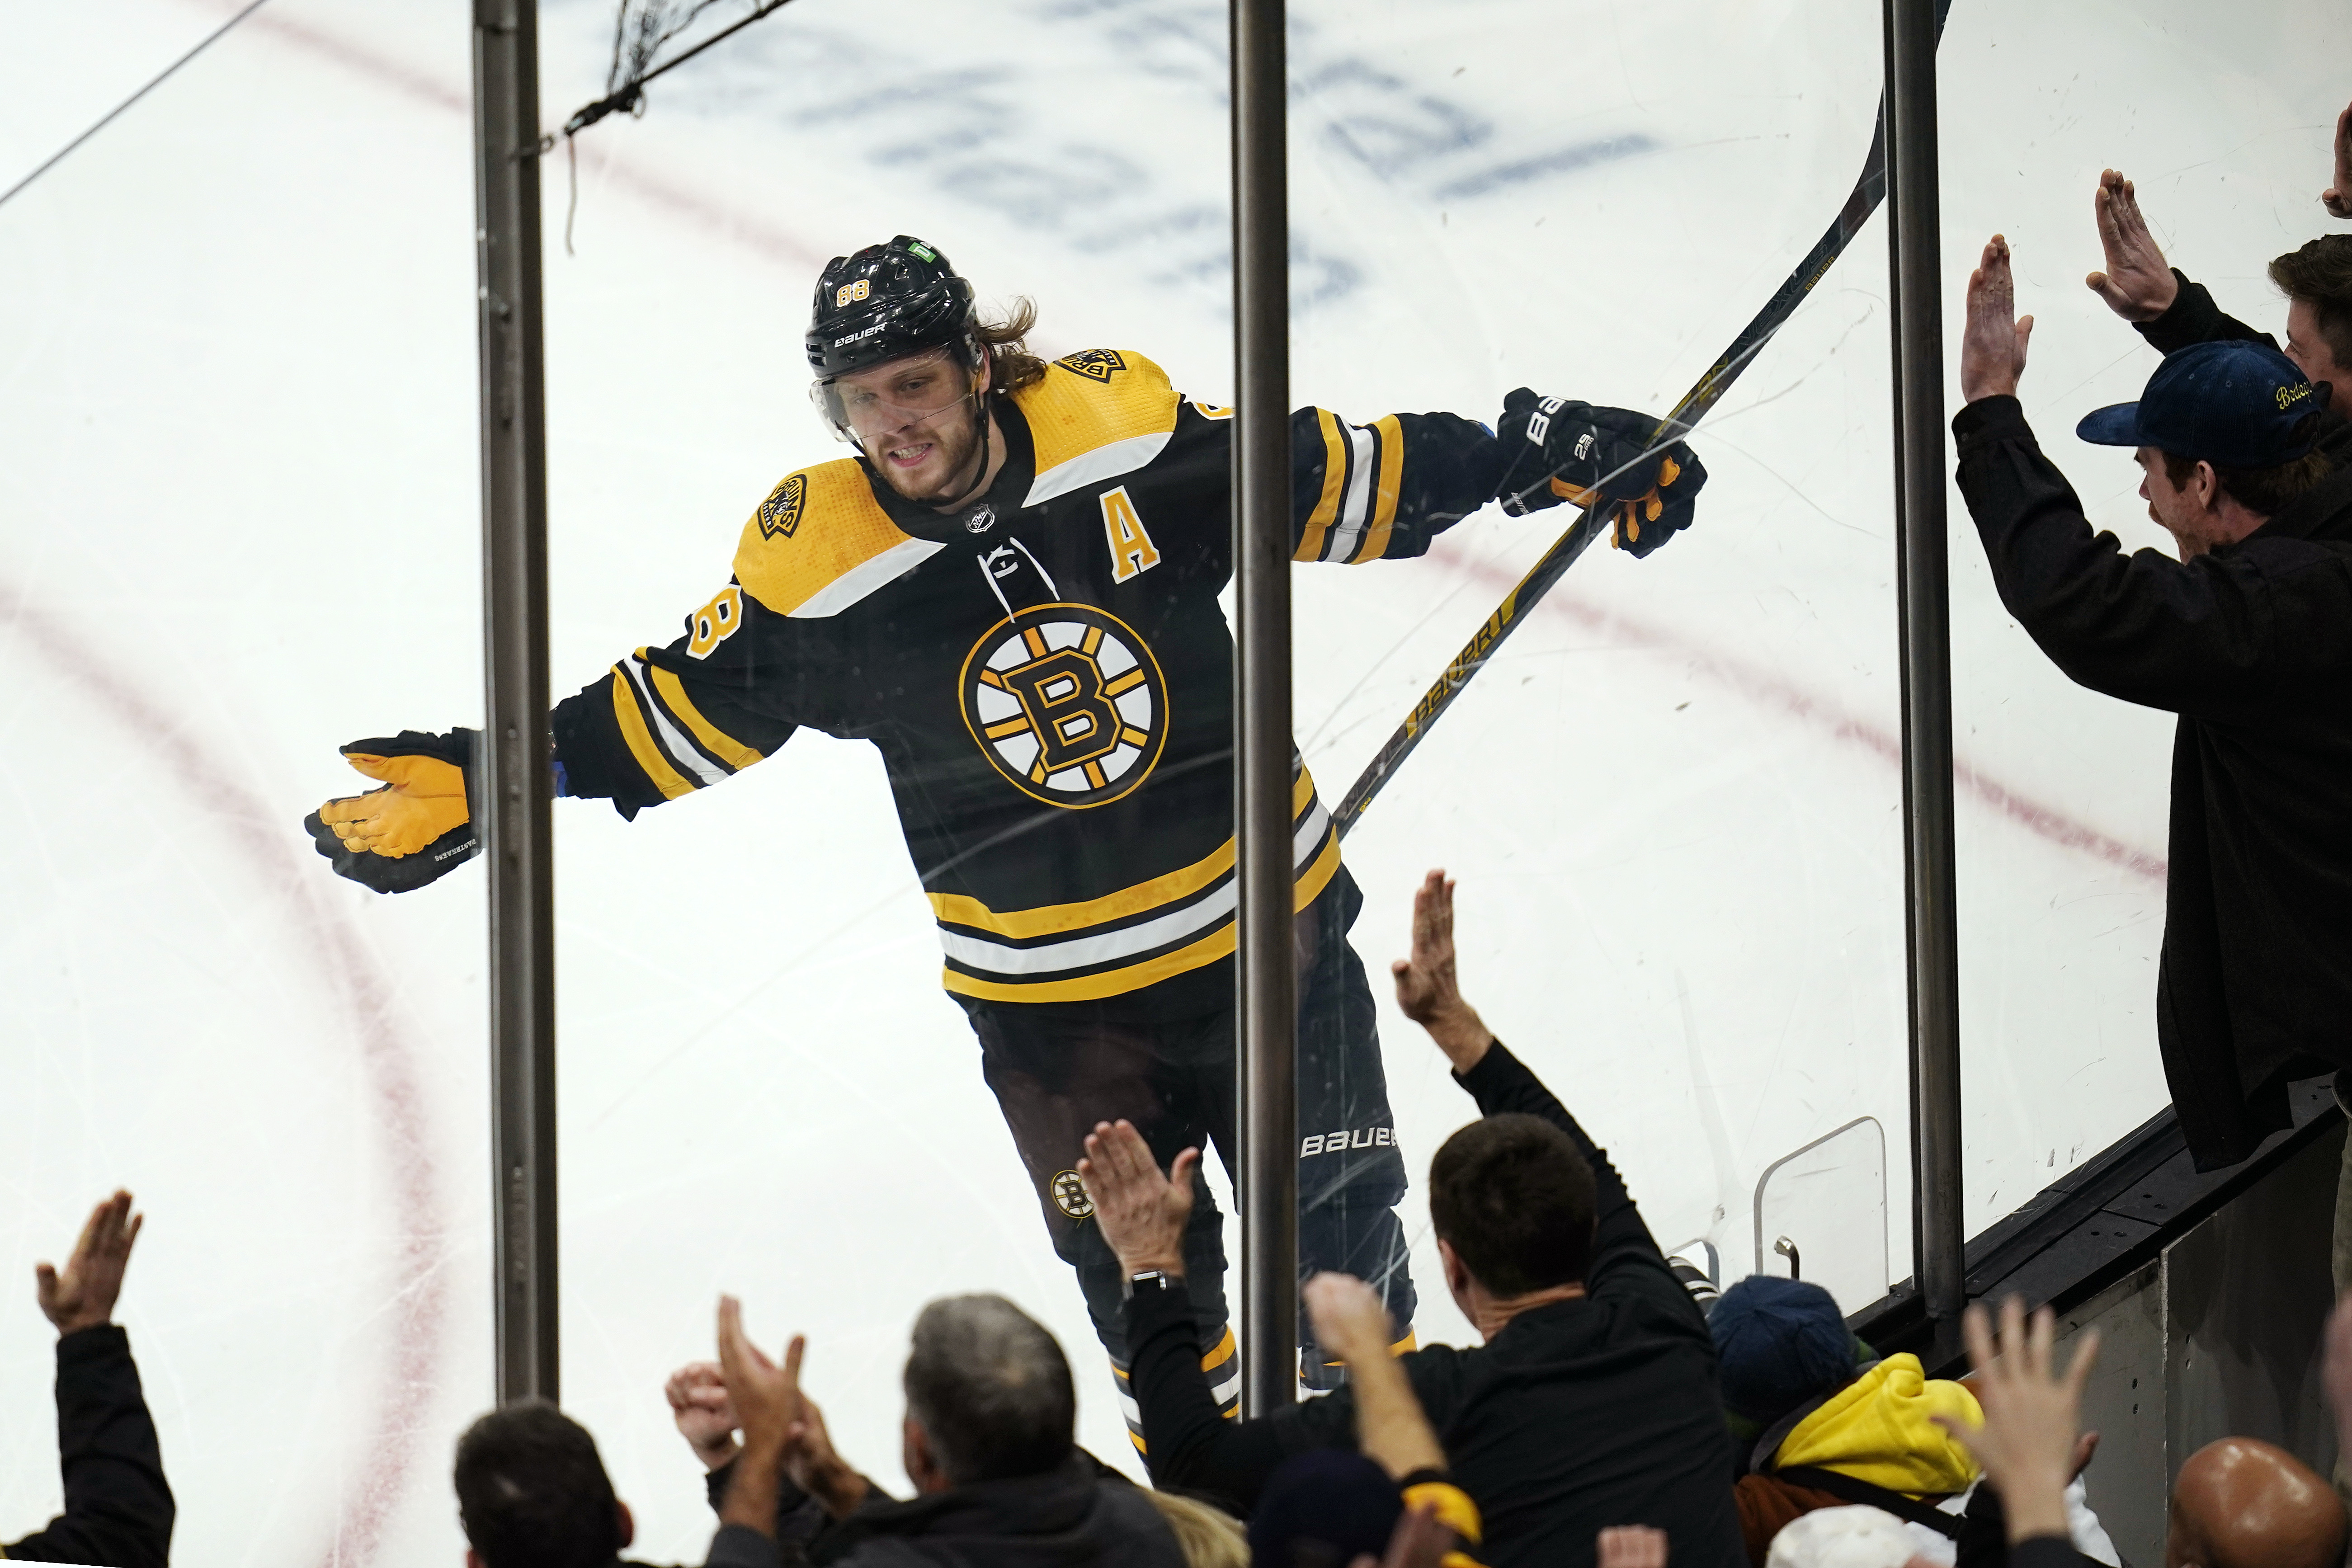 David Pastrnak Goes For 60 & Could Linus Ullmark & Jeremy Swayman Both  Play?